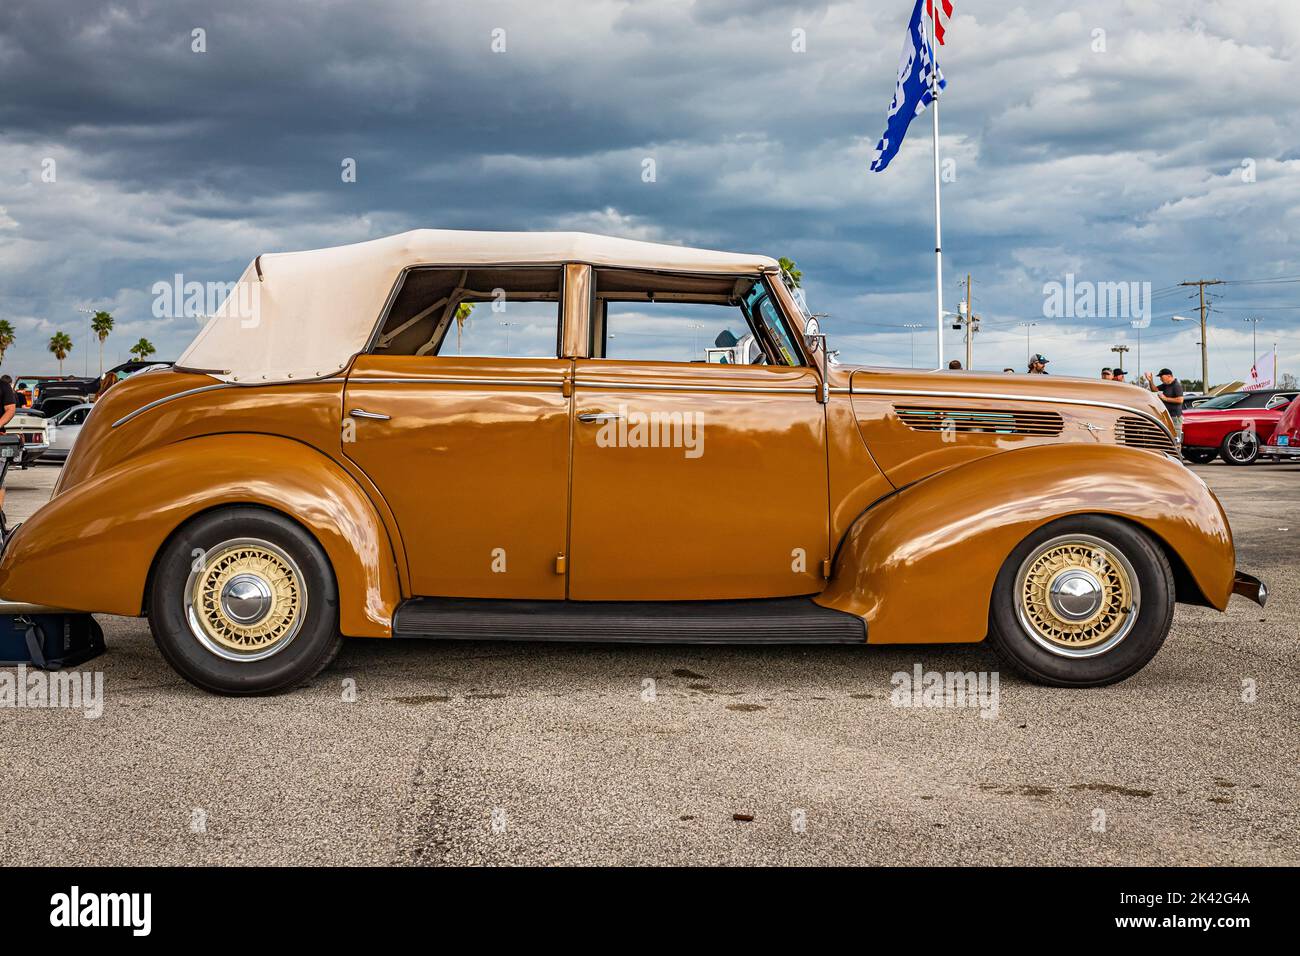 Daytona Beach, FL - November 28, 2020: Low perspective side view of a 1938 Ford Deluxe Model 82A 4 Door Convertible Sedan at a local car show. Stock Photo